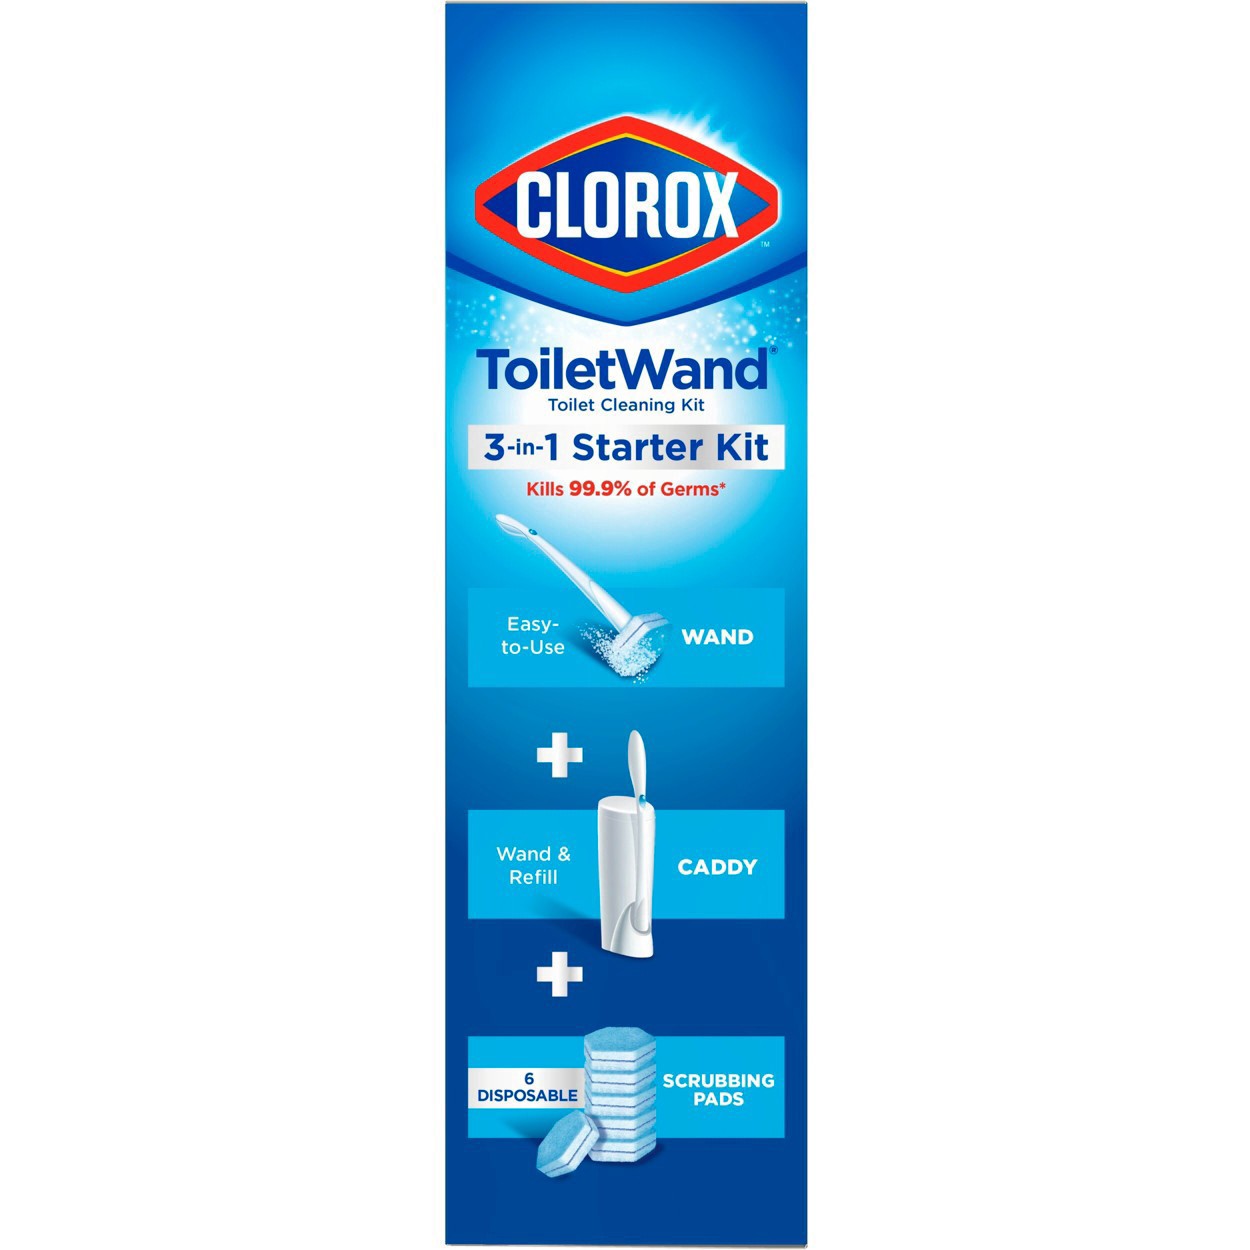 slide 18 of 176, Clorox Toilet Wand 3-in-1 Starter Toliet Cleaning Kit, 1 ct